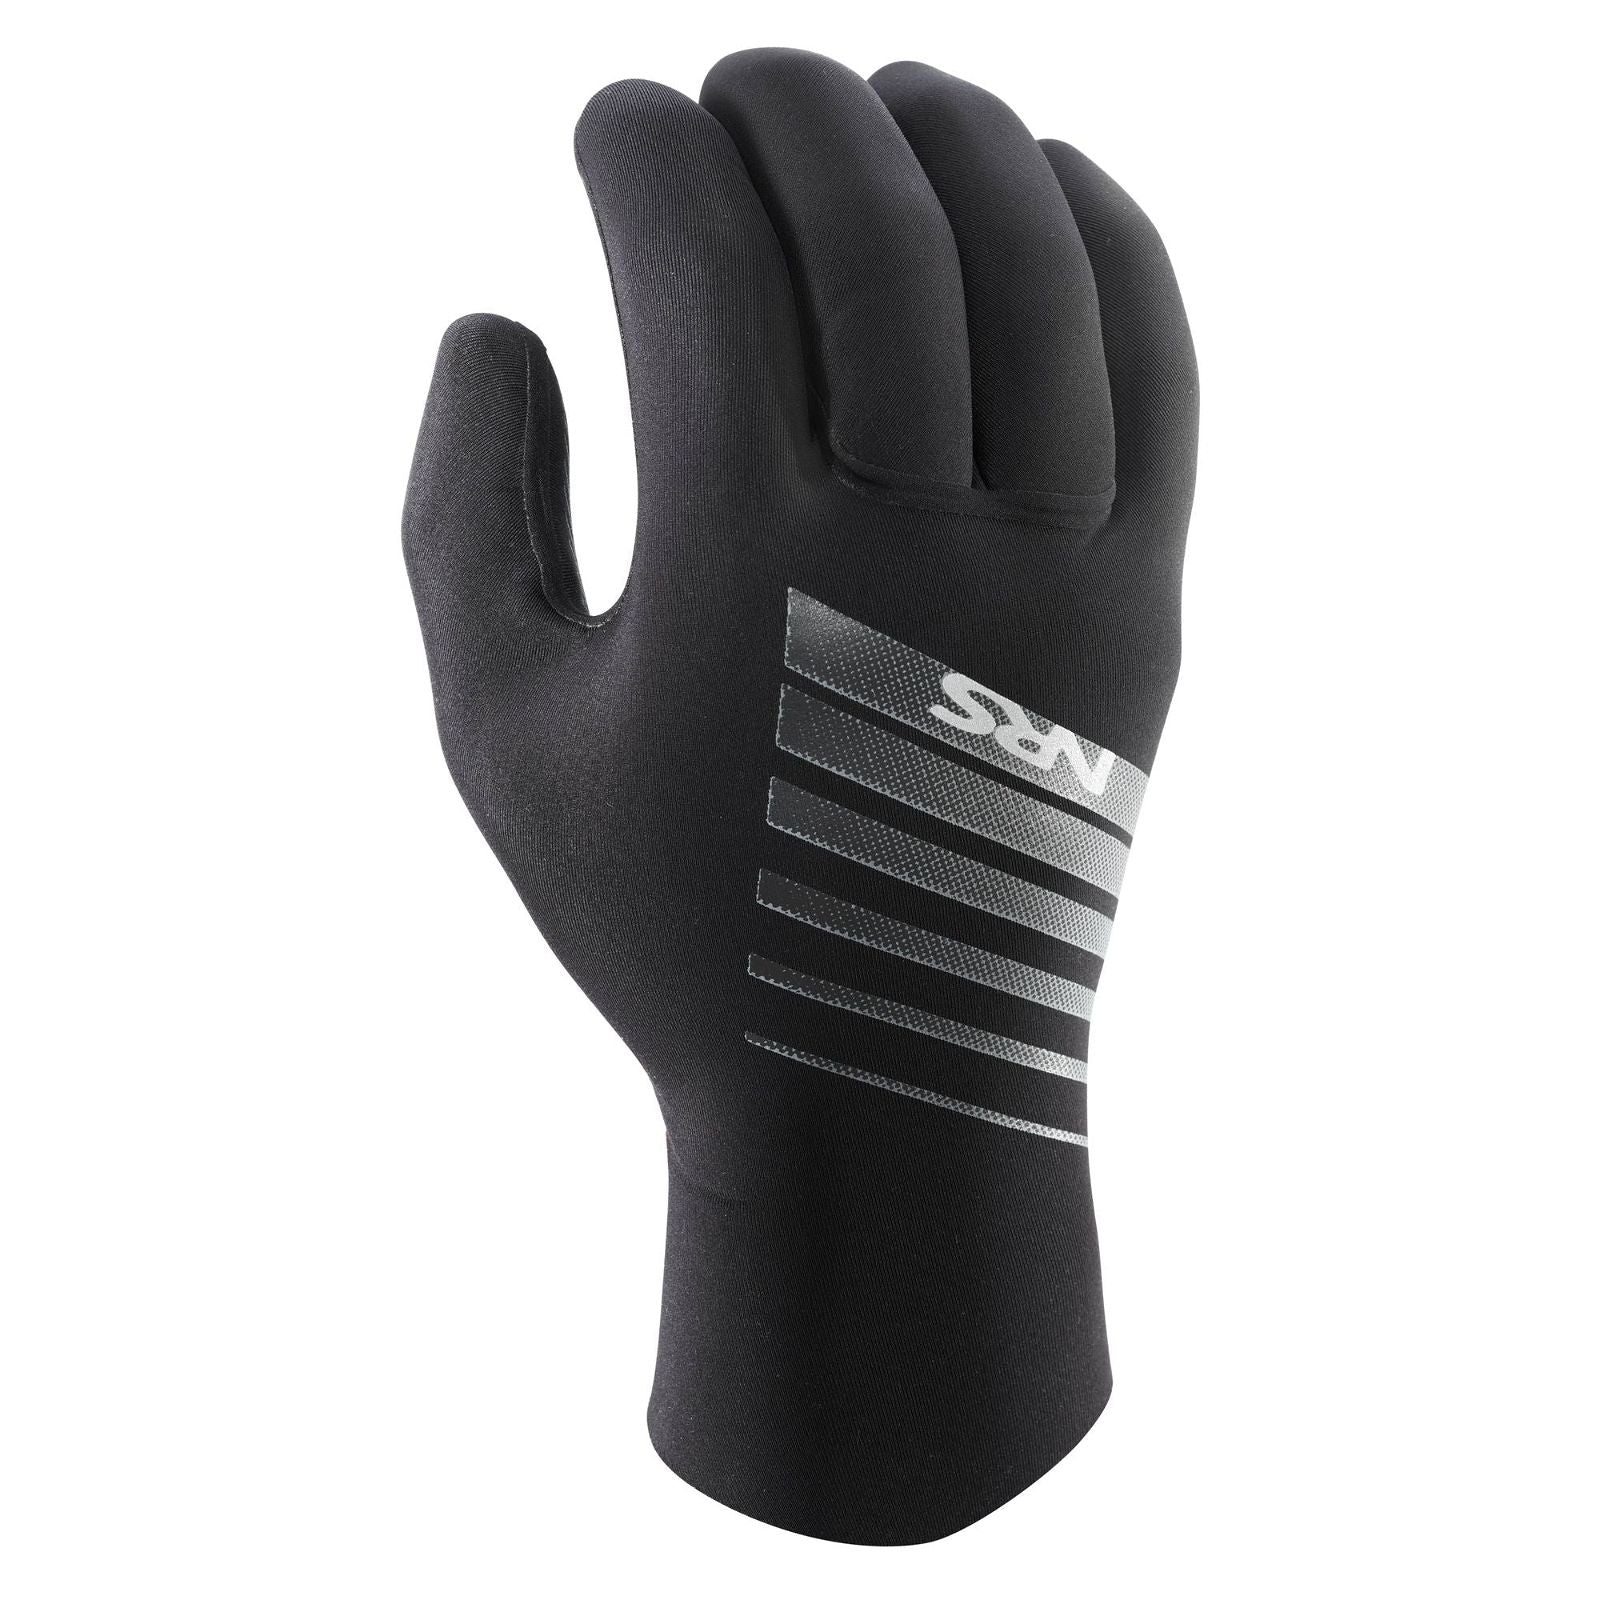   Catalyst Gloves  BestCoast Outfitters 